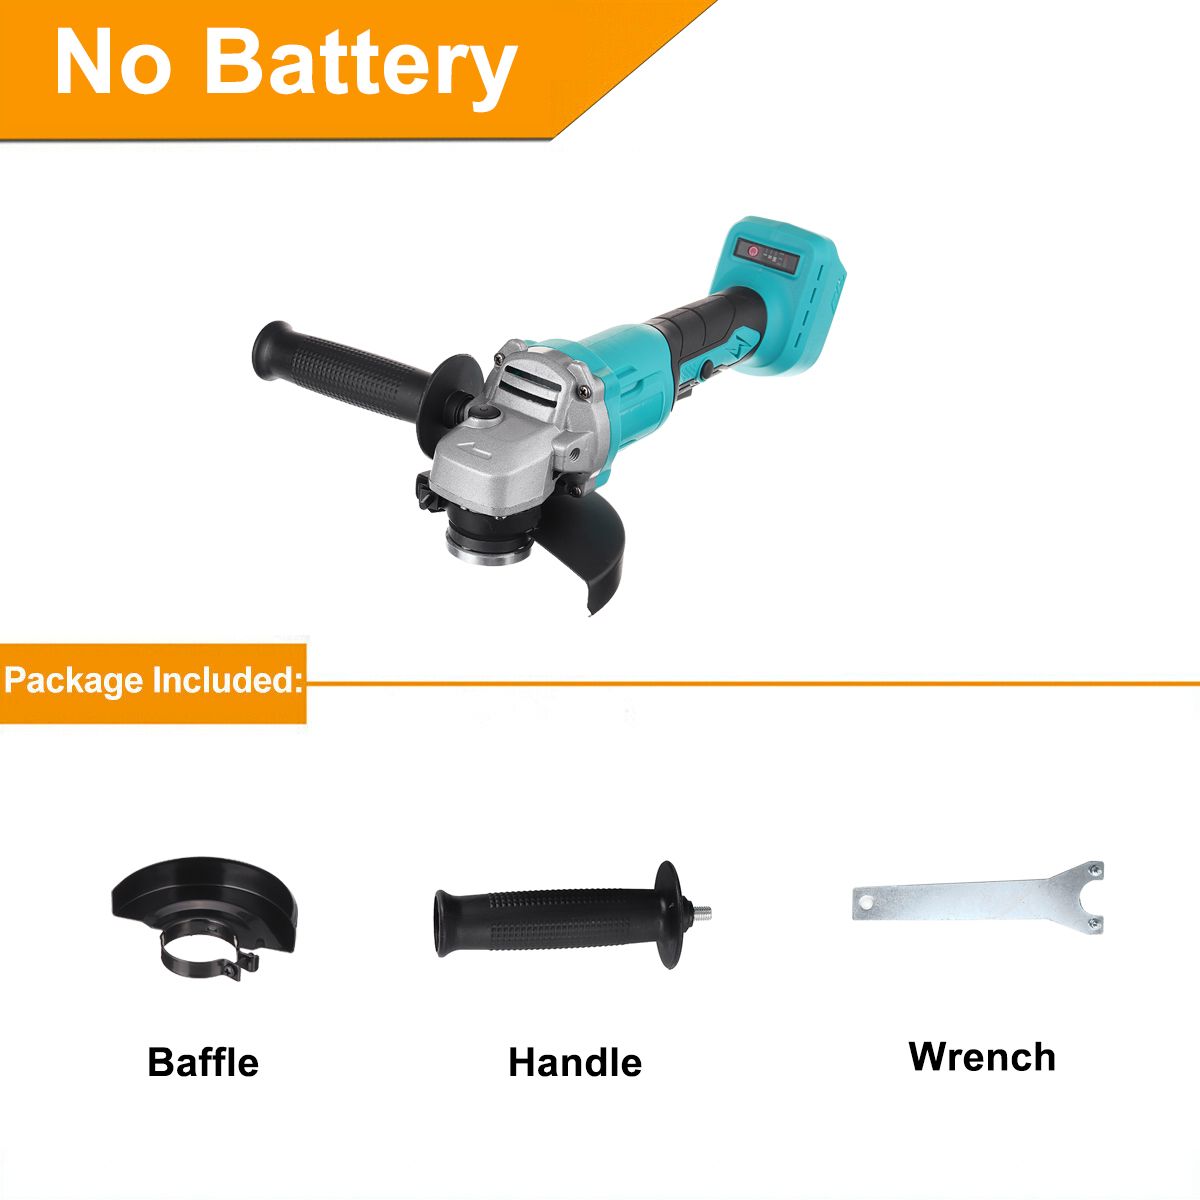 125mm18V-Cordless-Brushless-Angle-Grinder-Woodworking-Tool-For-Makita-Battery-1713408